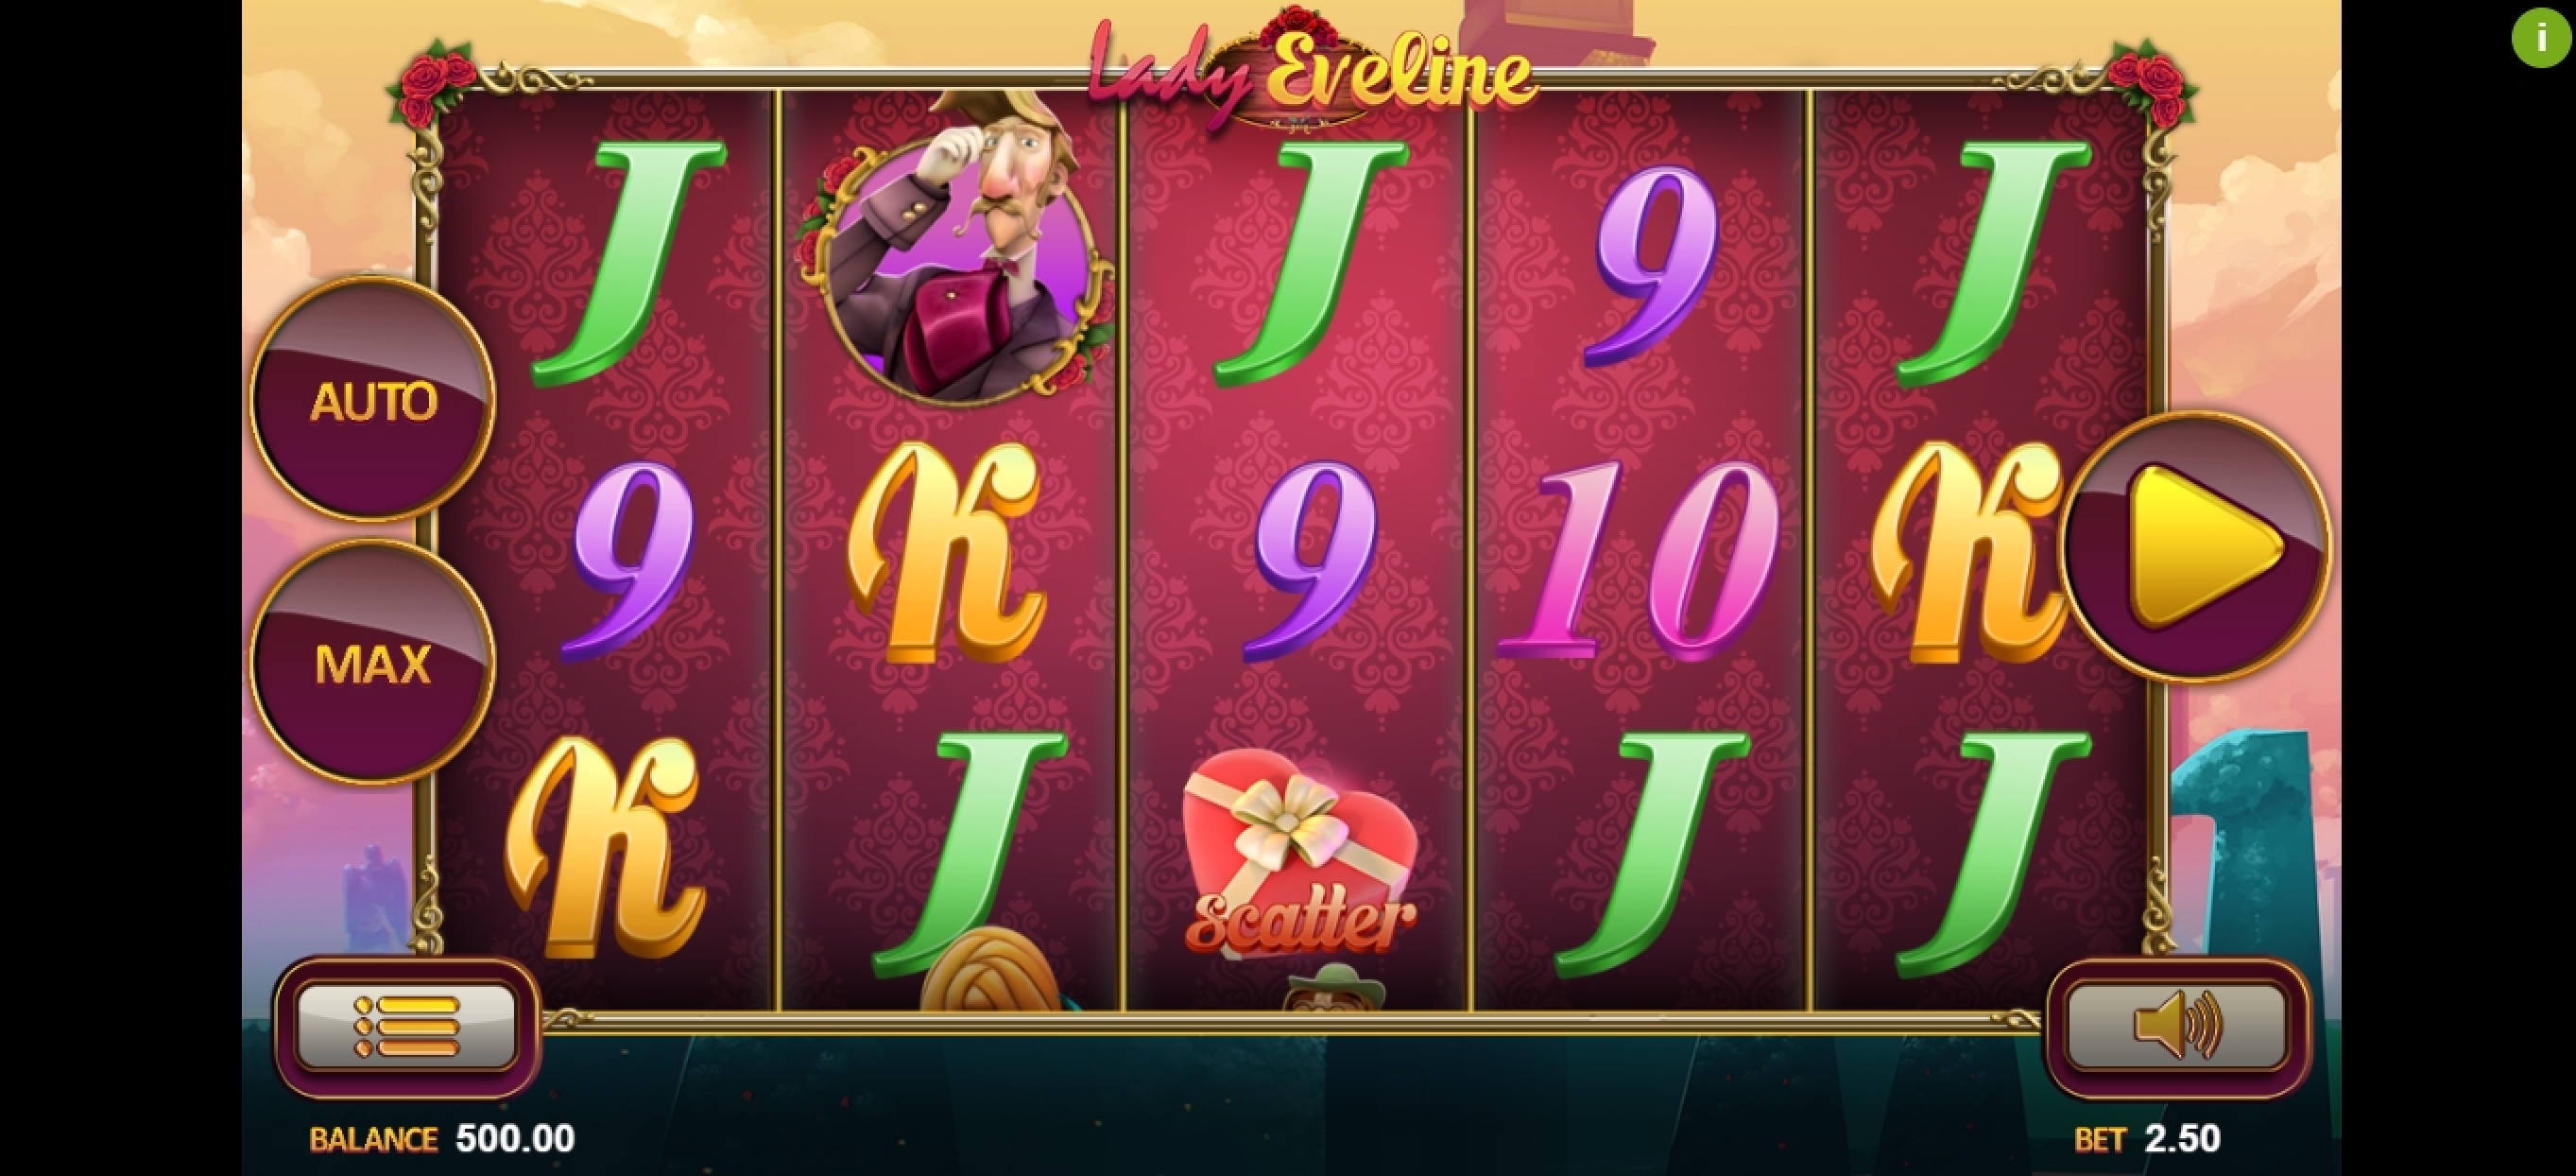 Reels in Lady Eveline Slot Game by Magma